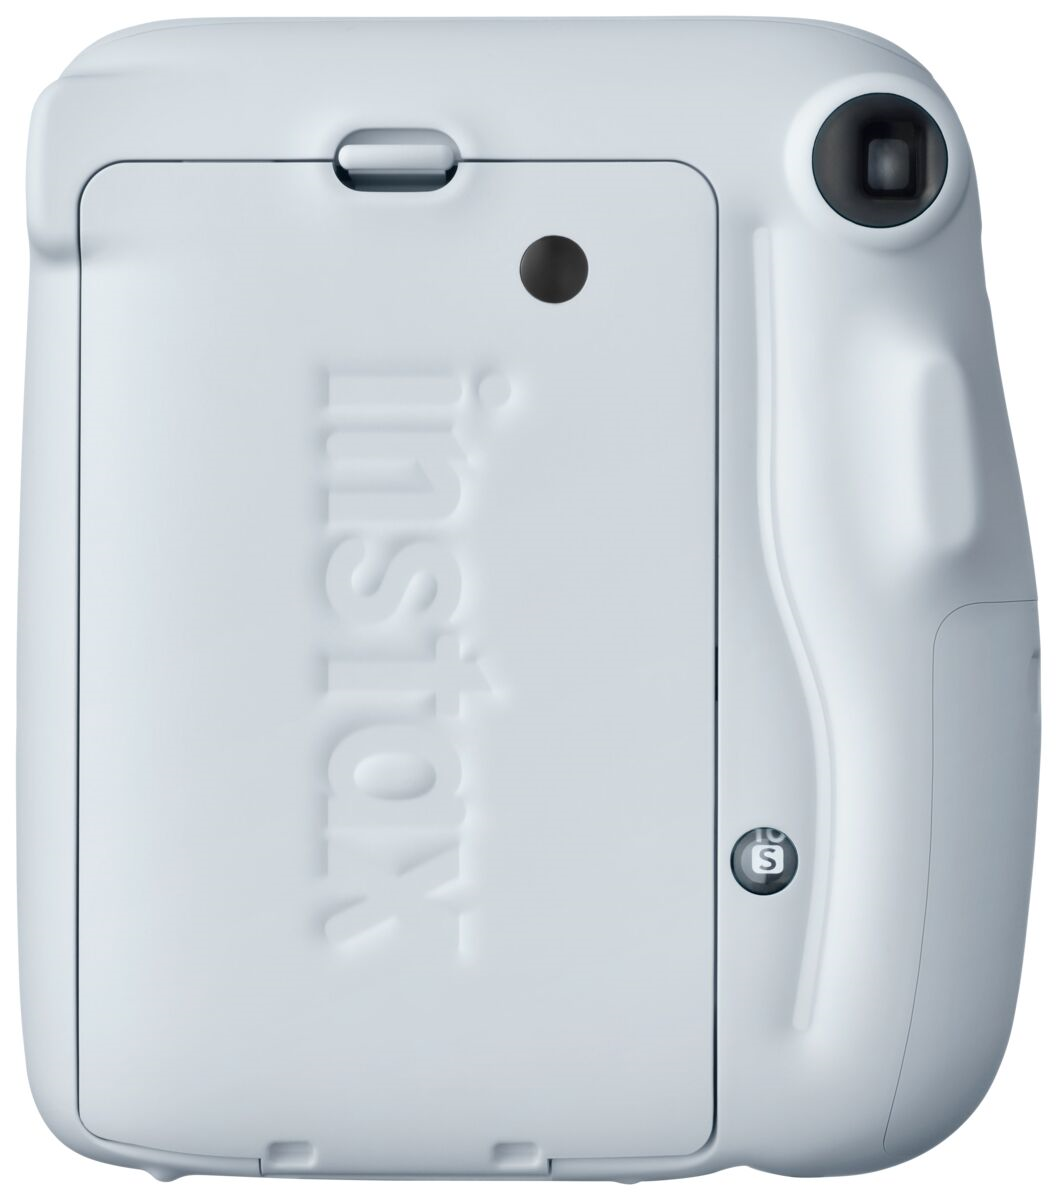 Picture of Instax Mini 11 Ice White